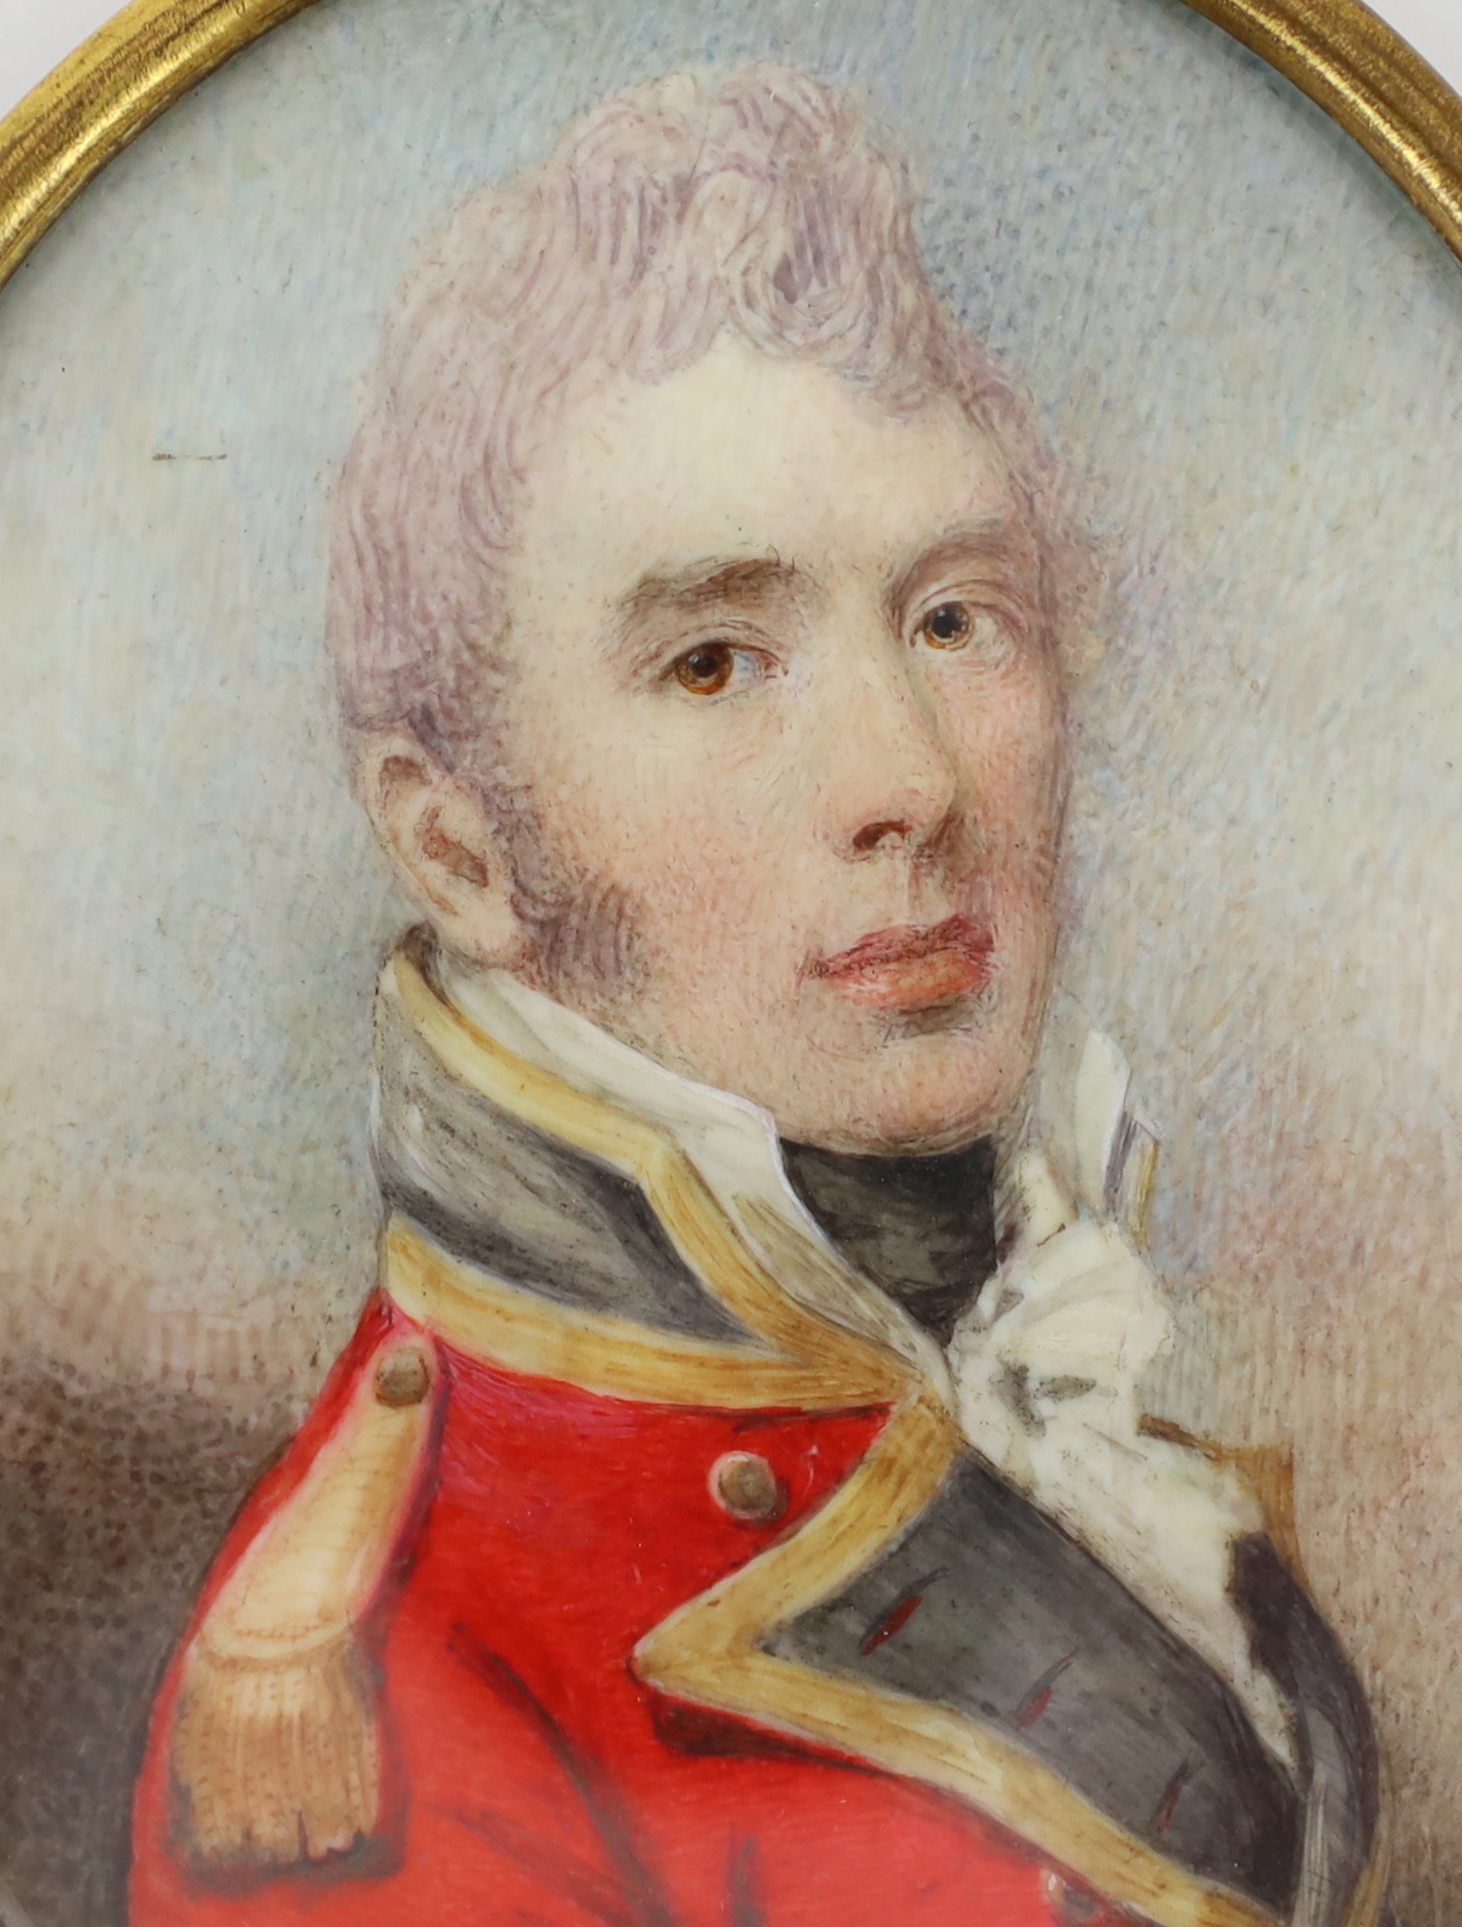 William Wood (English, 1769-1810), Portrait miniature of an army officer, watercolour on ivory, 8.2 x 6.5cm. CITES Submission reference TSQQGKA3